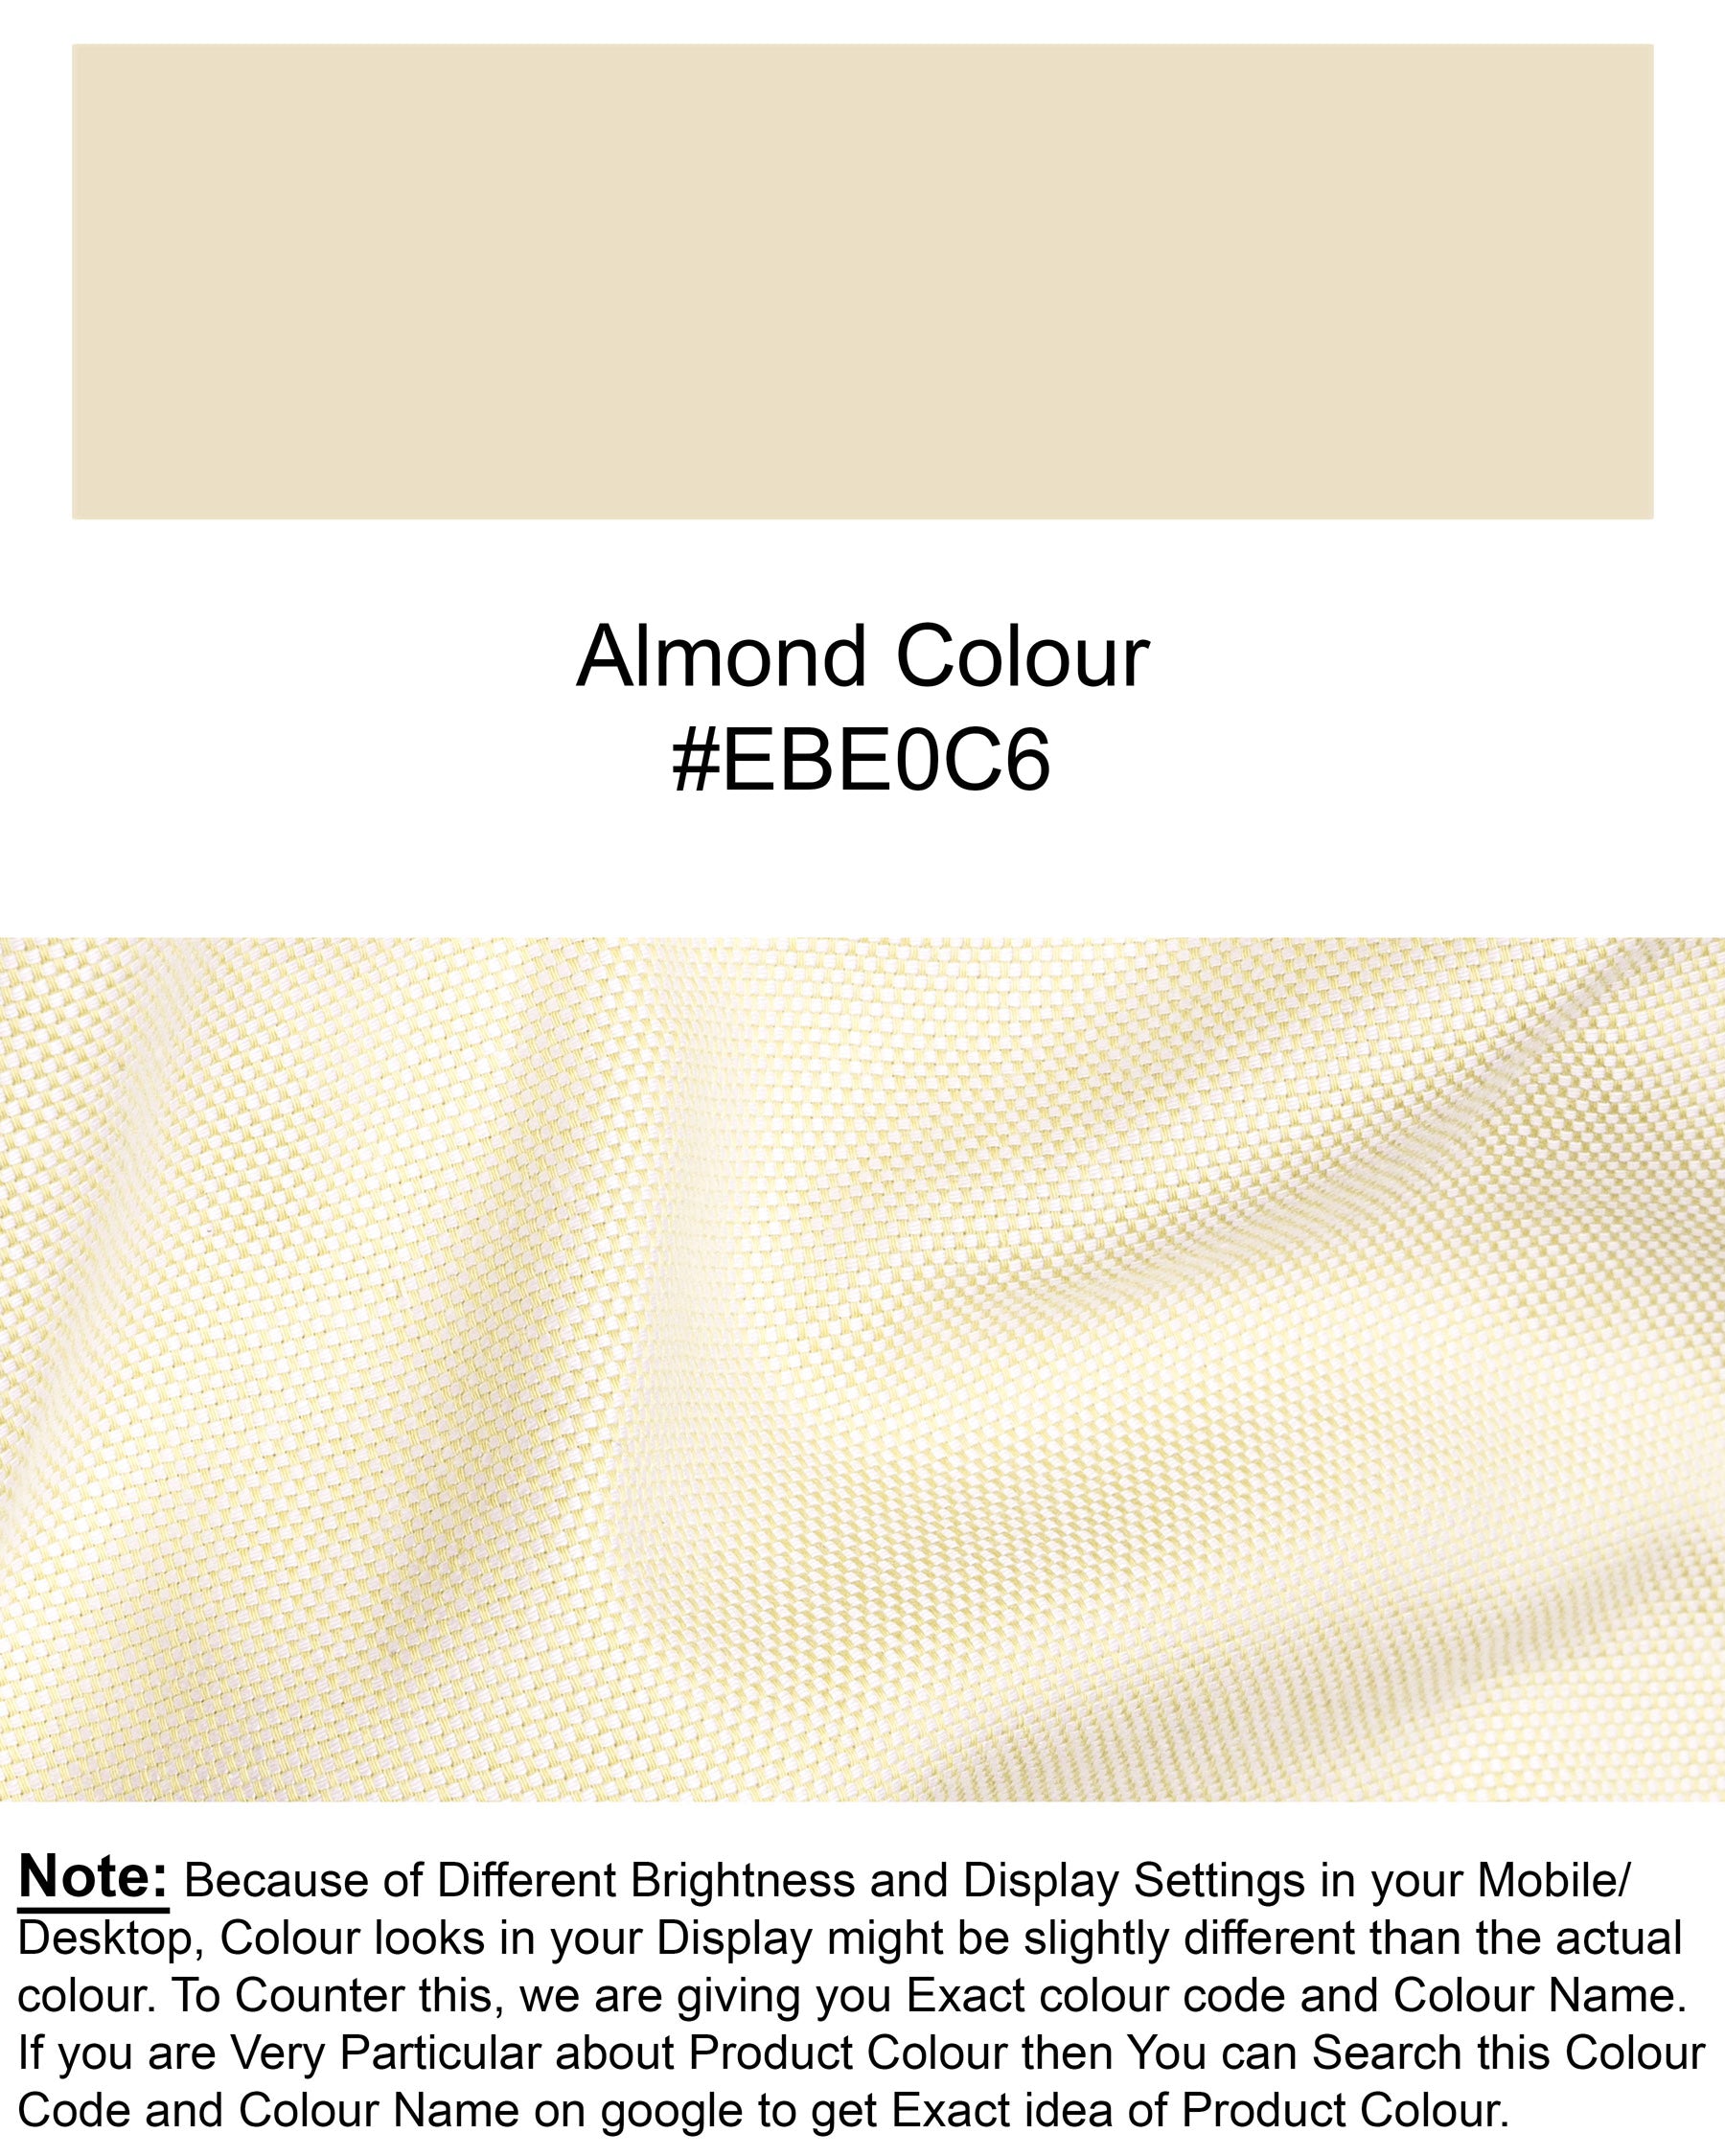 Almond Brown with White Collar Dobby Heavuweight Premium Giza Cotton Over Shirt 5915-WCC-OS-38, 5915-WCC-OS-H-38, 5915-WCC-OS-39, 5915-WCC-OS-H-39, 5915-WCC-OS-40, 5915-WCC-OS-H-40, 5915-WCC-OS-42, 5915-WCC-OS-H-42, 5915-WCC-OS-44, 5915-WCC-OS-H-44, 5915-WCC-OS-46, 5915-WCC-OS-H-46, 5915-WCC-OS-48, 5915-WCC-OS-H-48, 5915-WCC-OS-50, 5915-WCC-OS-H-50, 5915-WCC-OS-52, 5915-WCC-OS-H-52